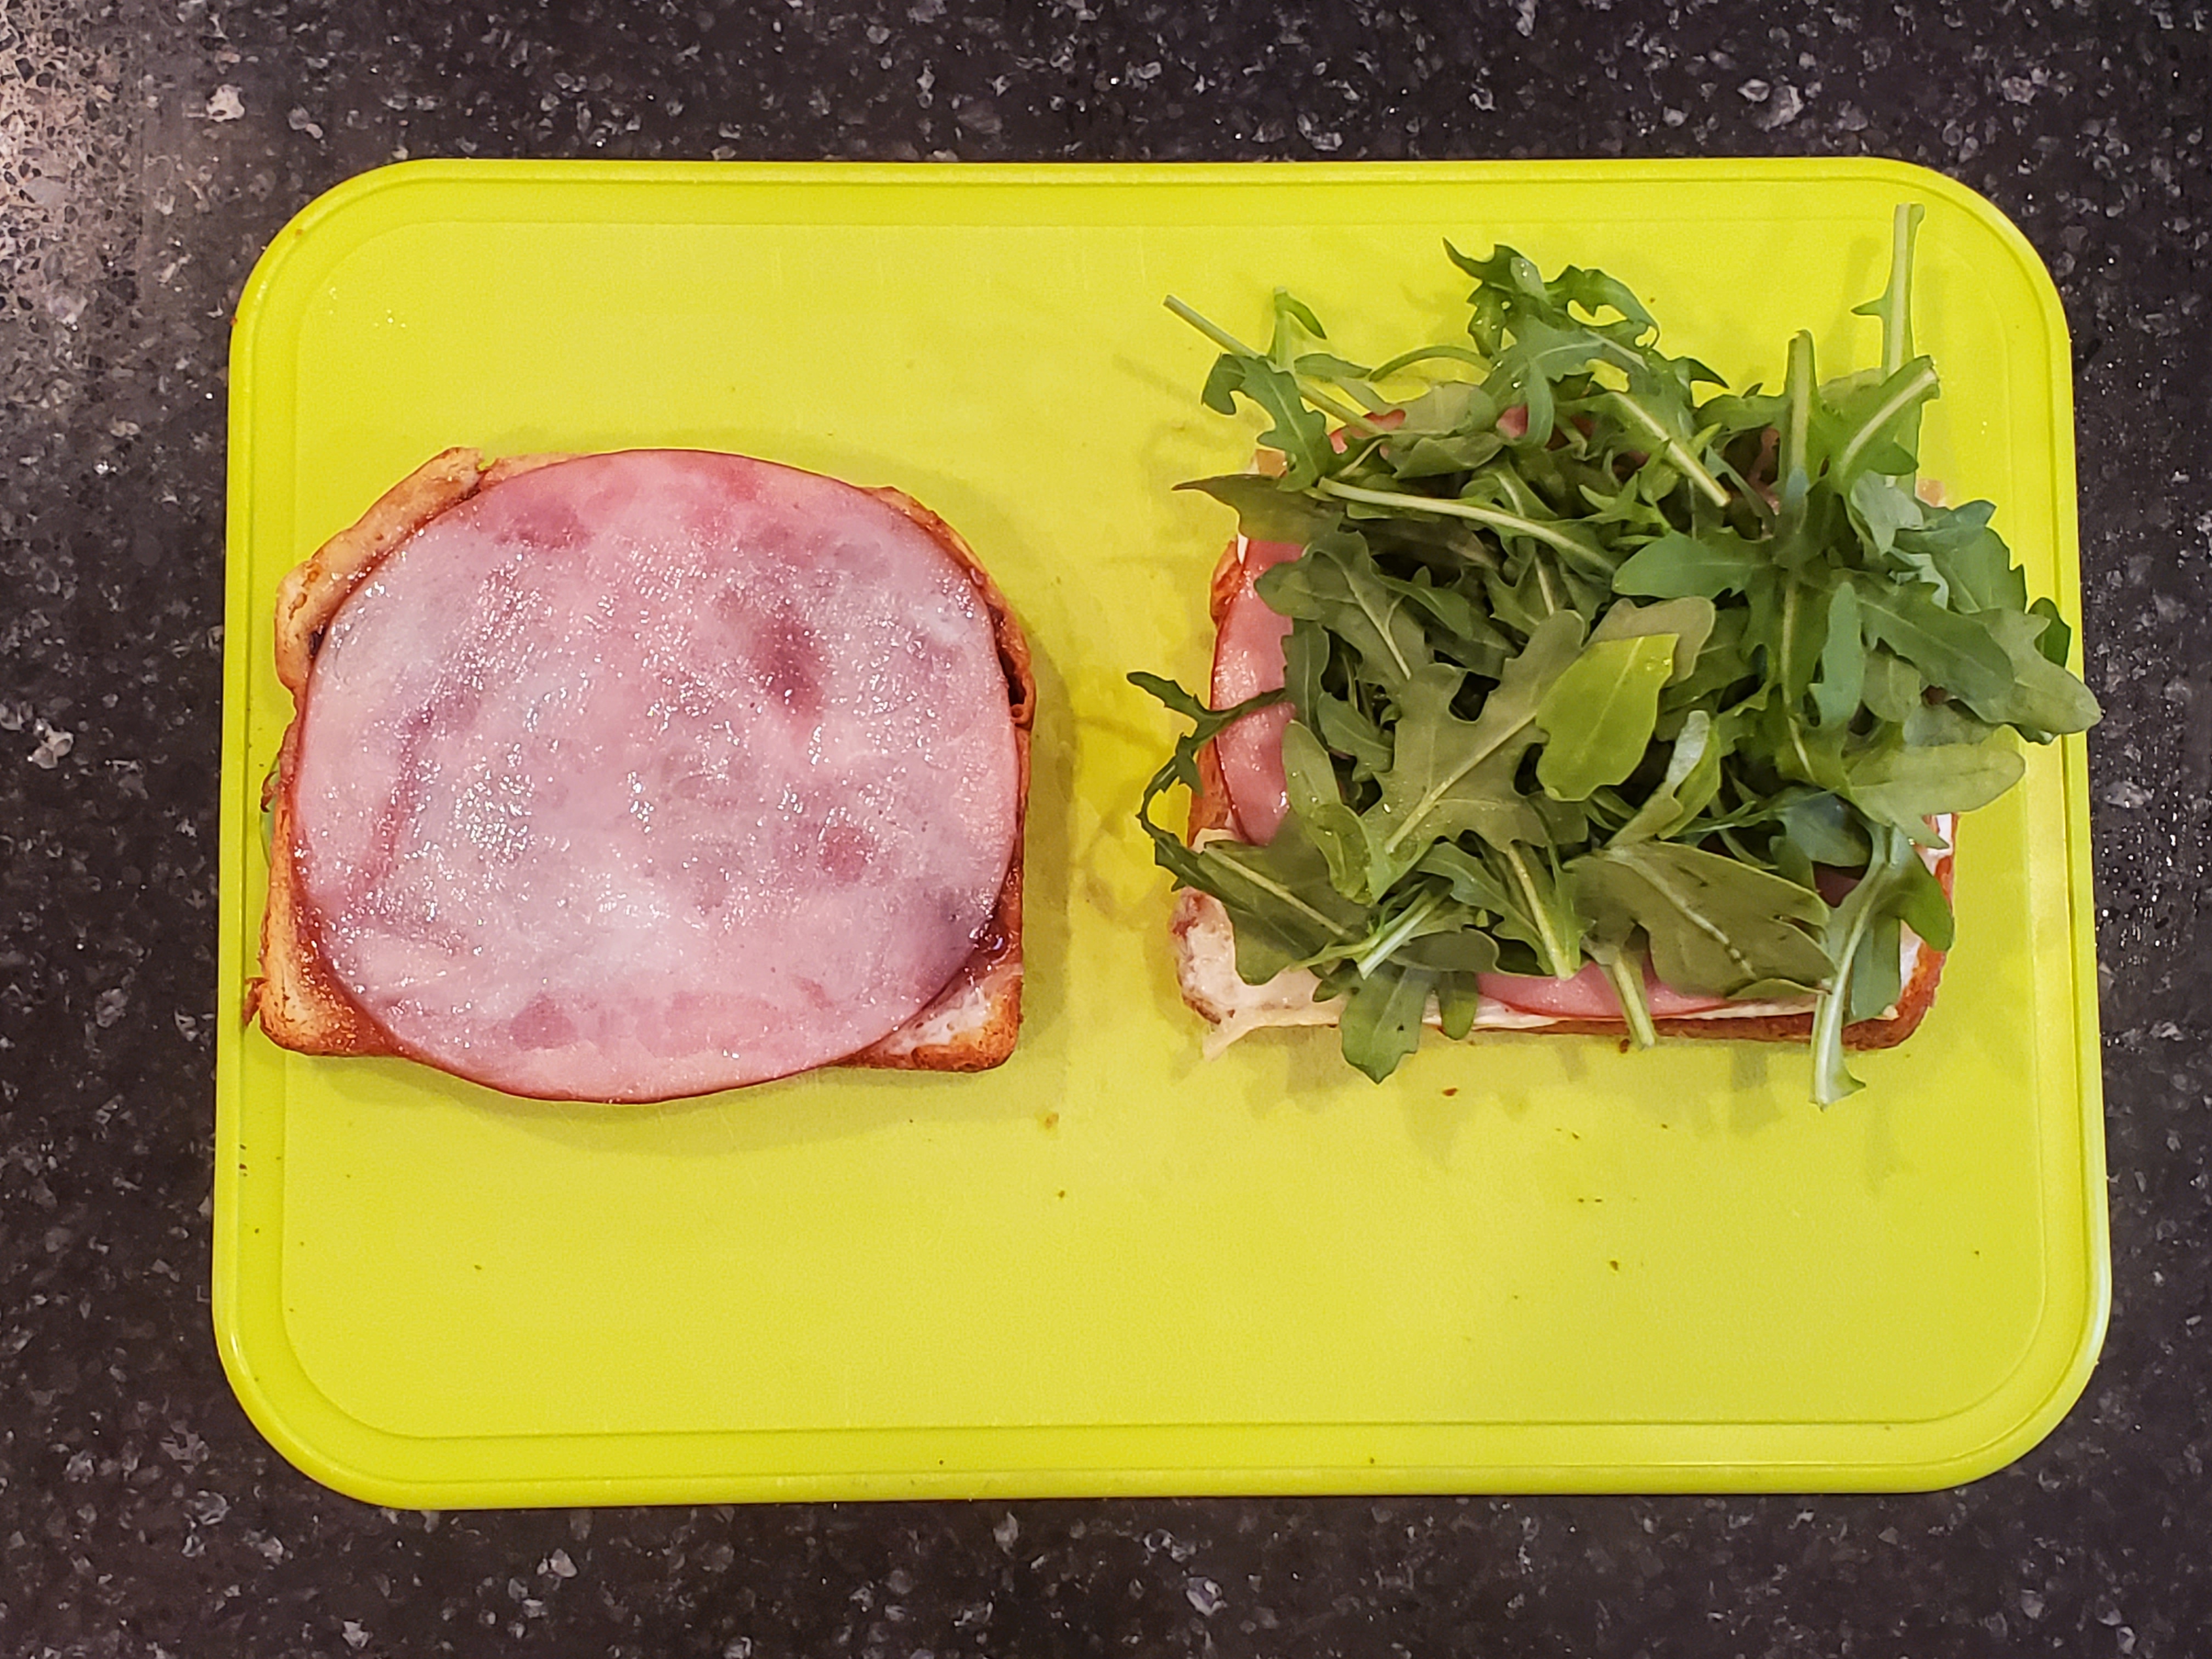 One of the sandwiches sits open-faced on a bright lime green cutting board with a handful of arugula on the right half.